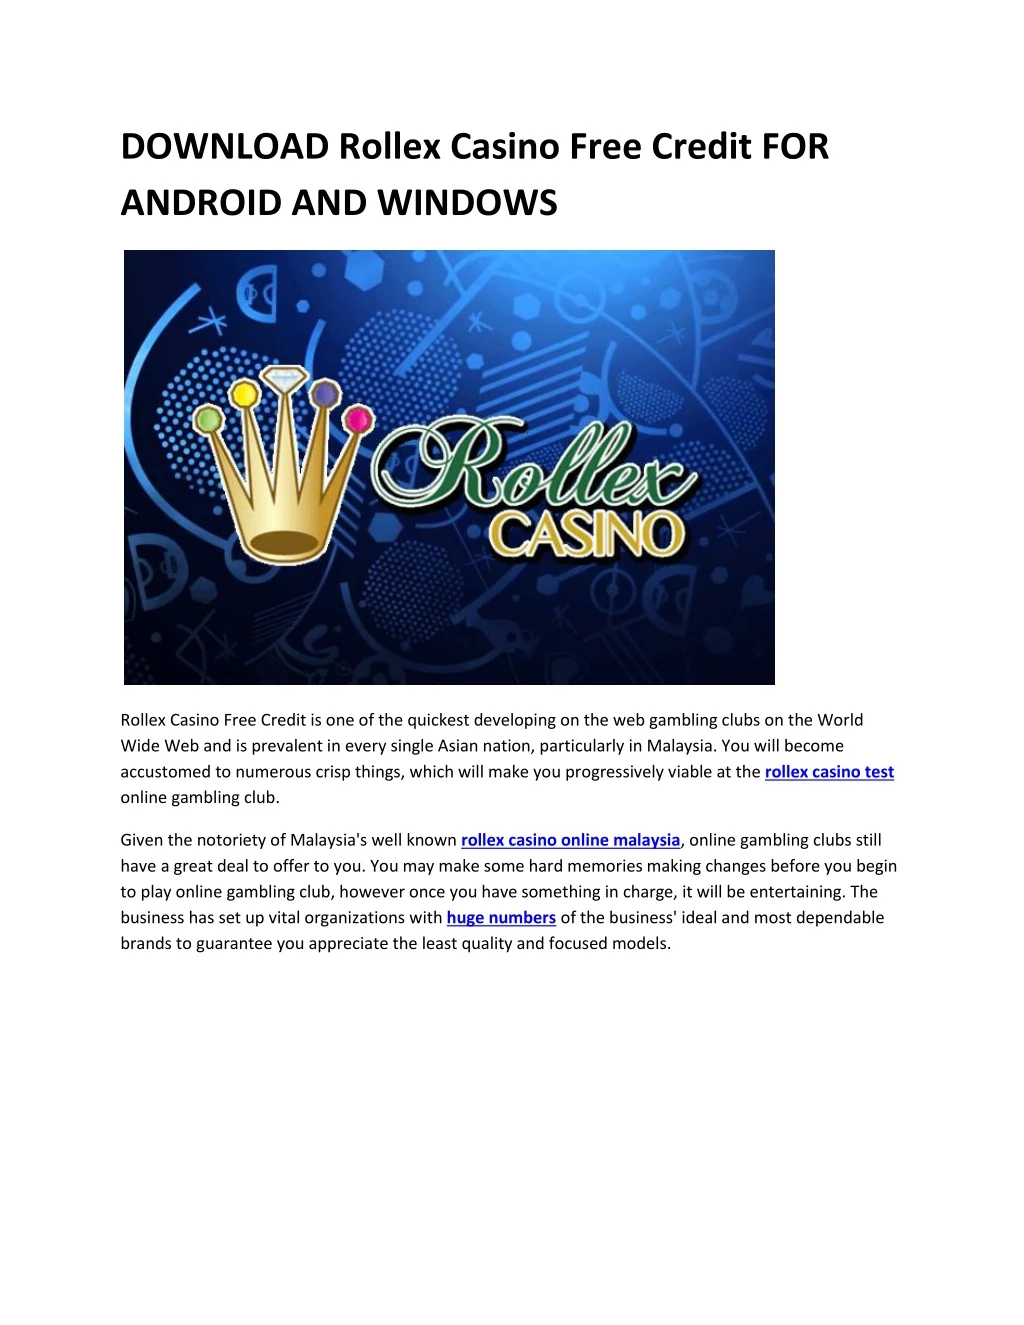 download rollex casino free credit for android